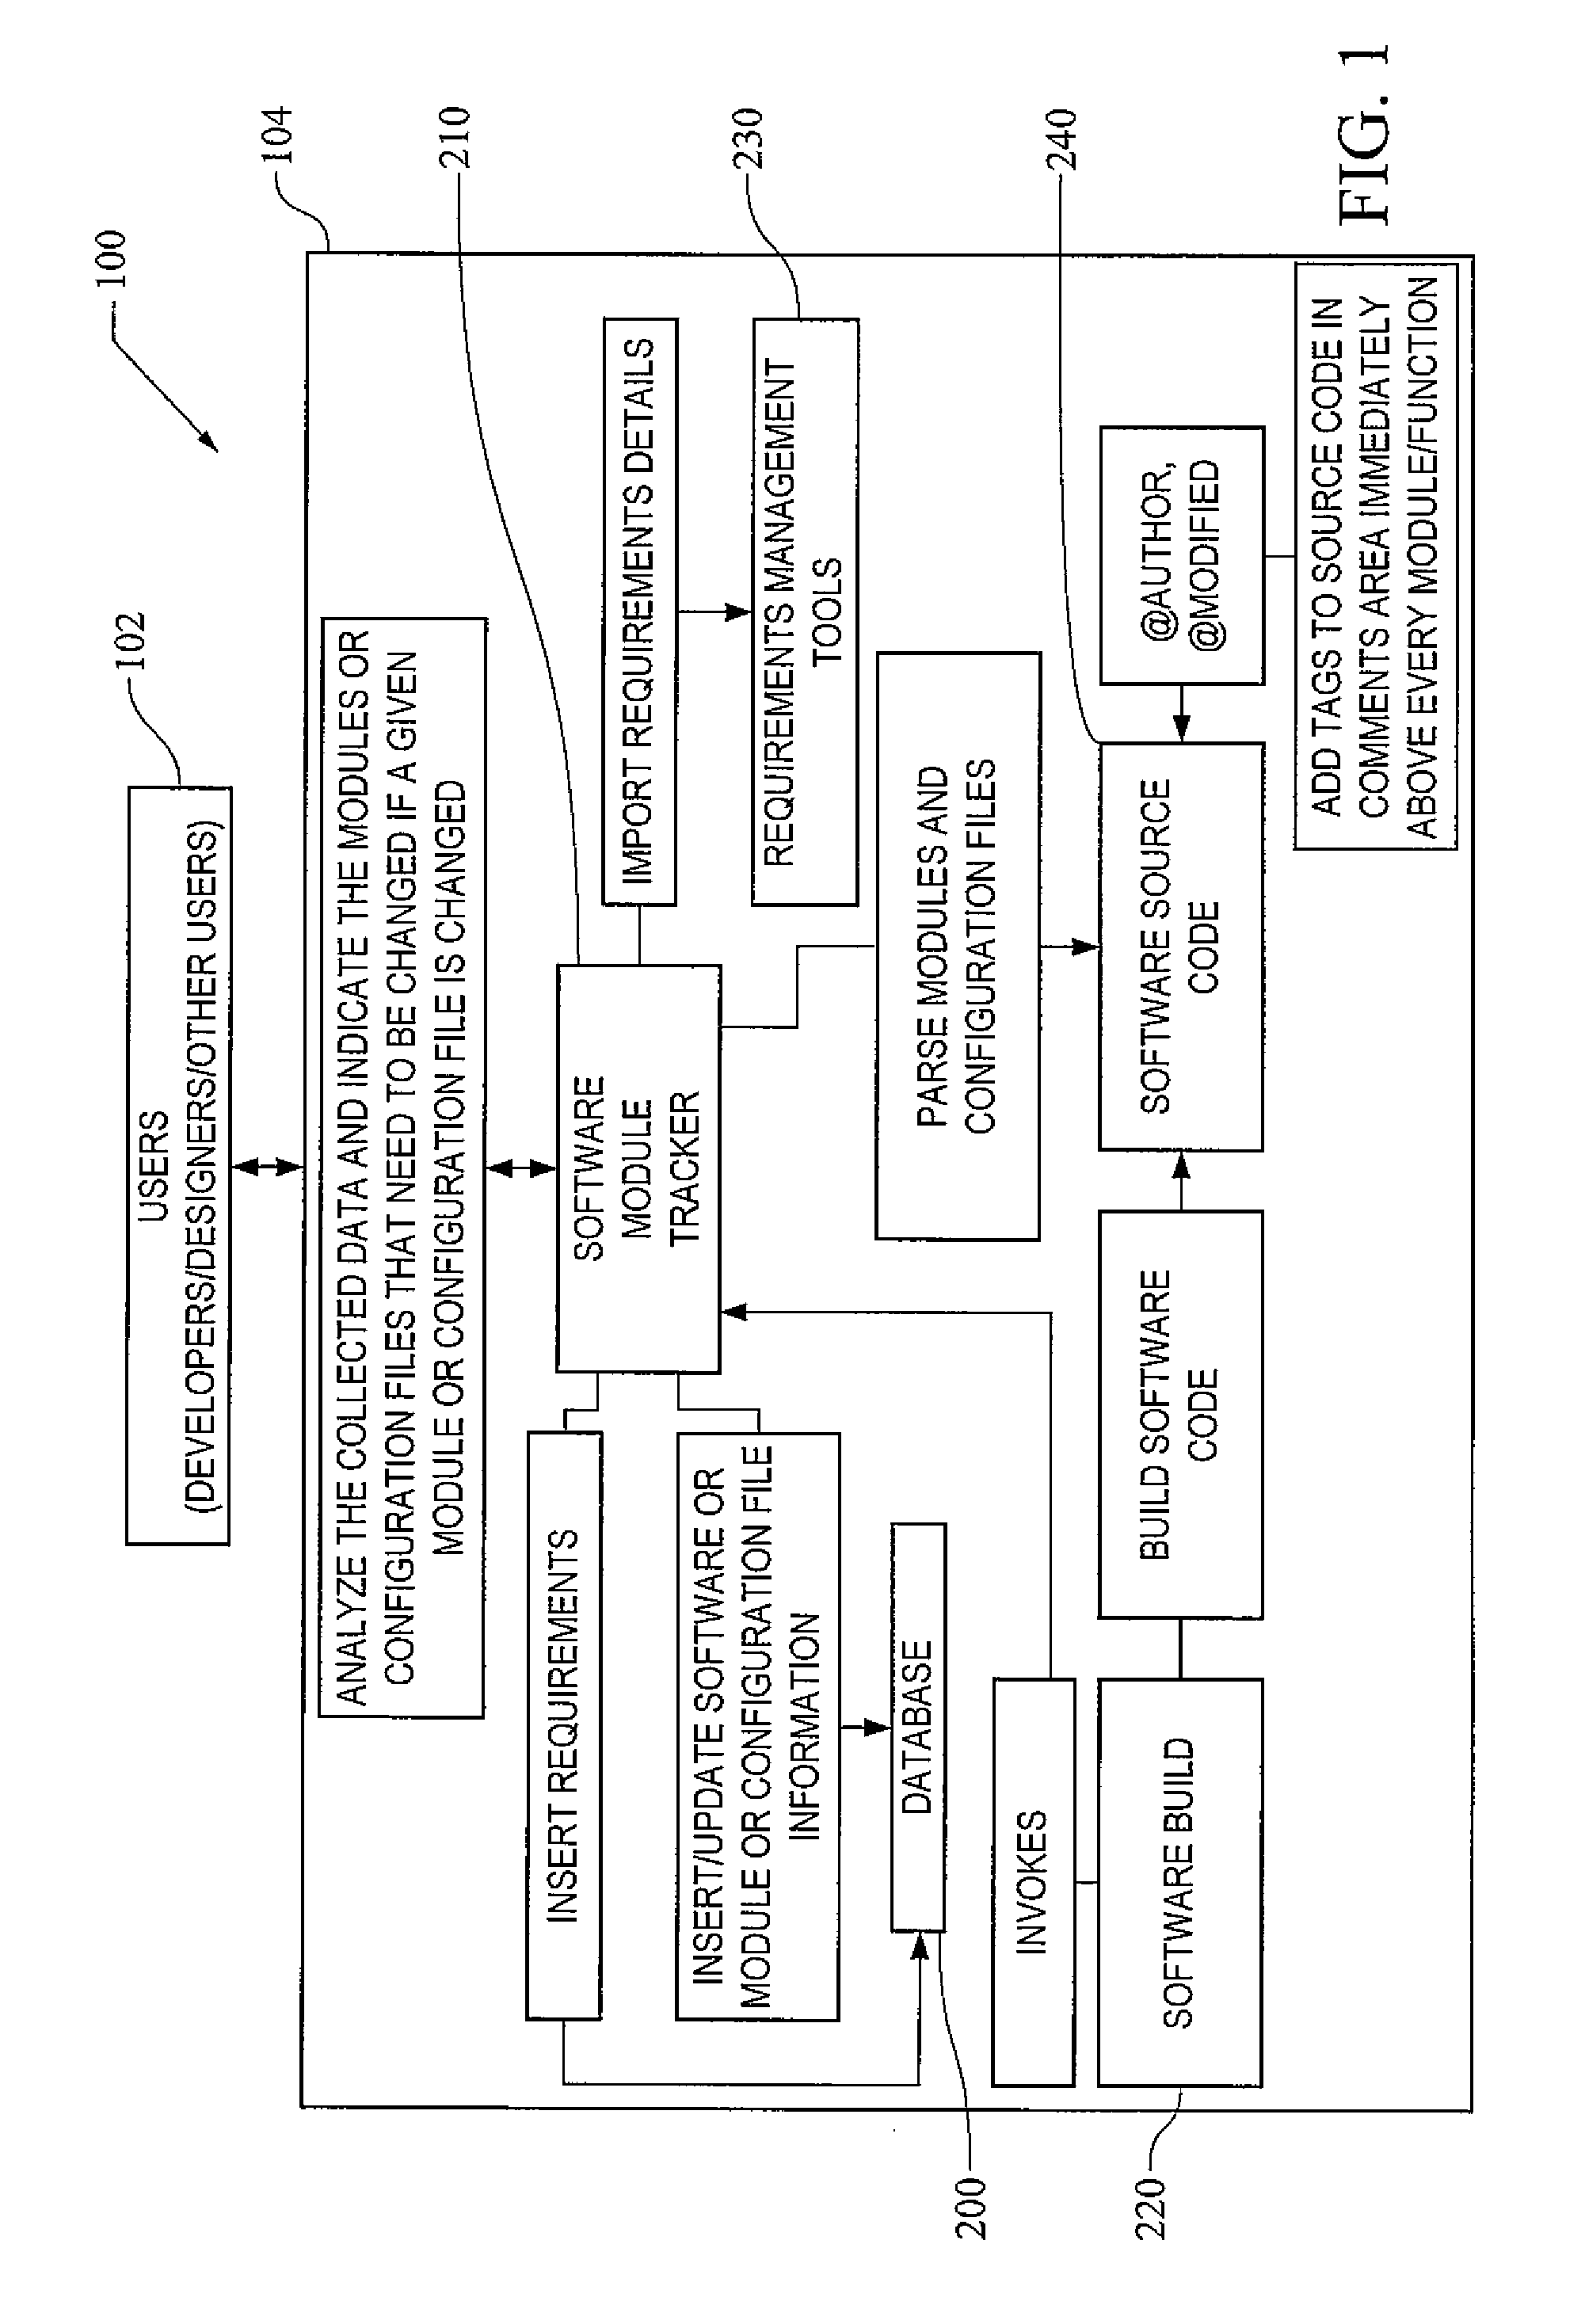 System and Method for Tracking and Notifying Related Software, Modules, and Configuration Files During Software Development and Maintenance